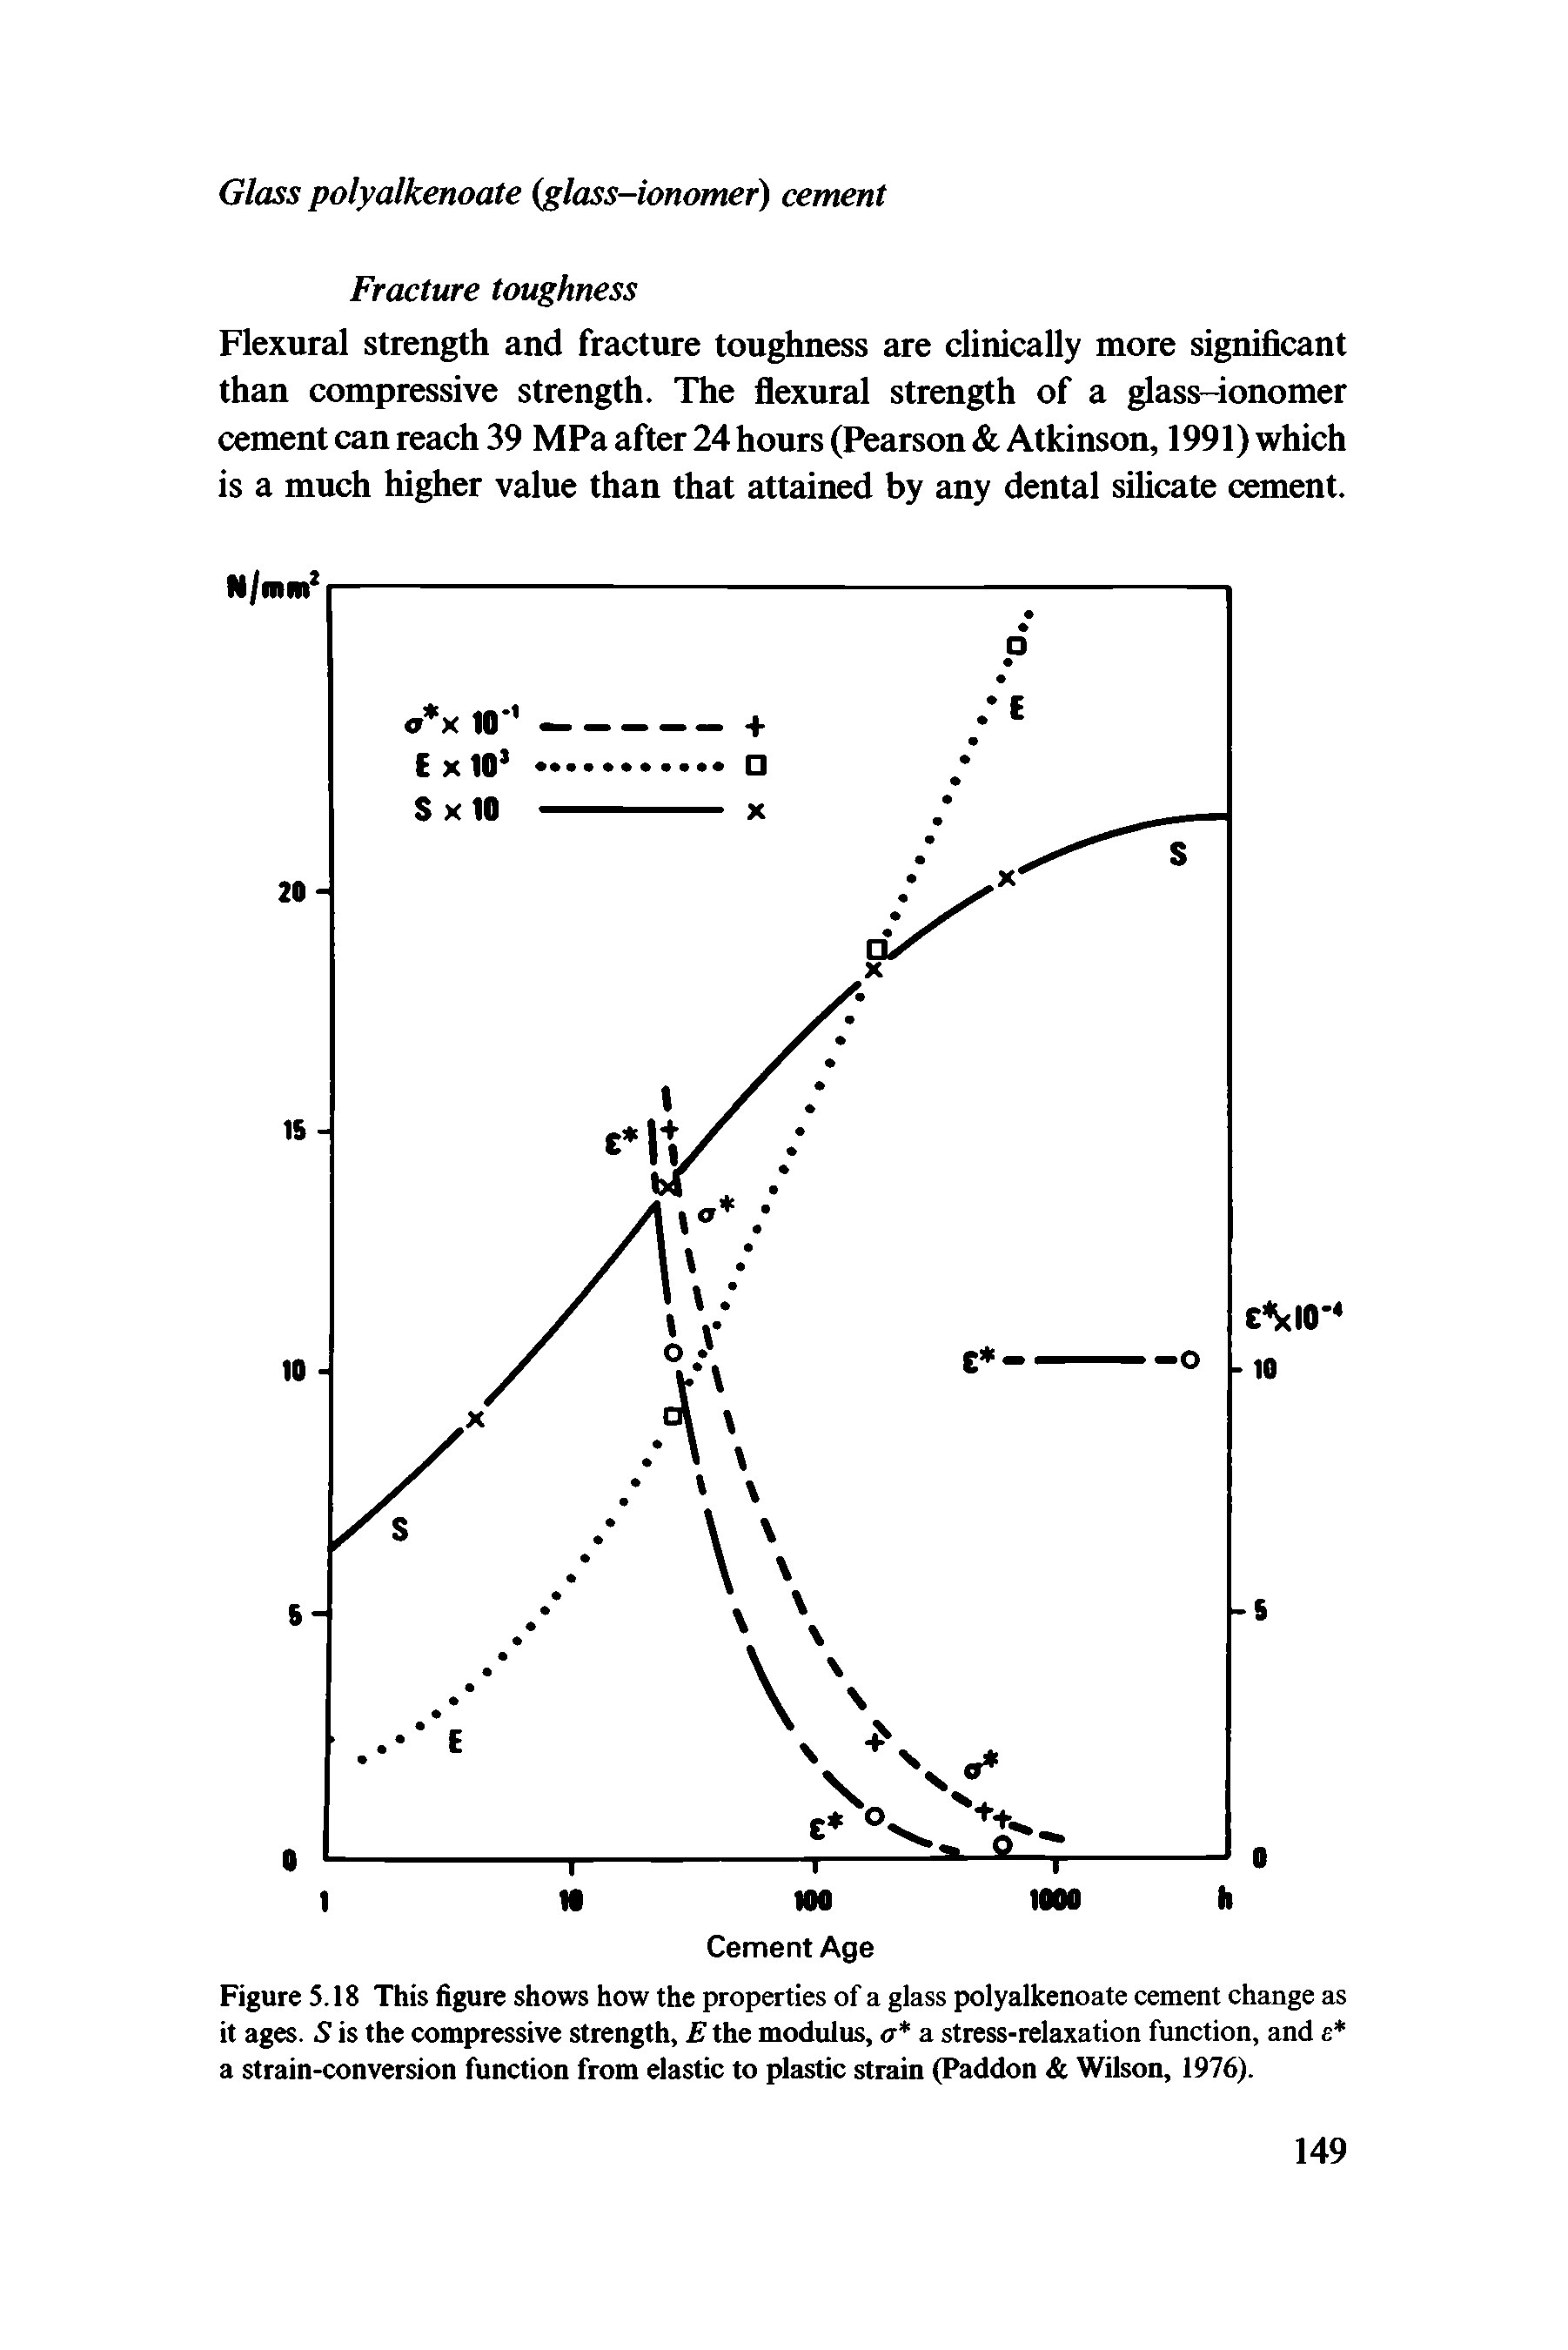 Figure 5.18 This figure shows how the properties of a glass polyalkenoate cement change as it ages. S is the compressive strength, E the modulus, a a stress-relaxation function, and c a strain-conversion function from elastic to plastic strain (Paddon Wilson, 1976).